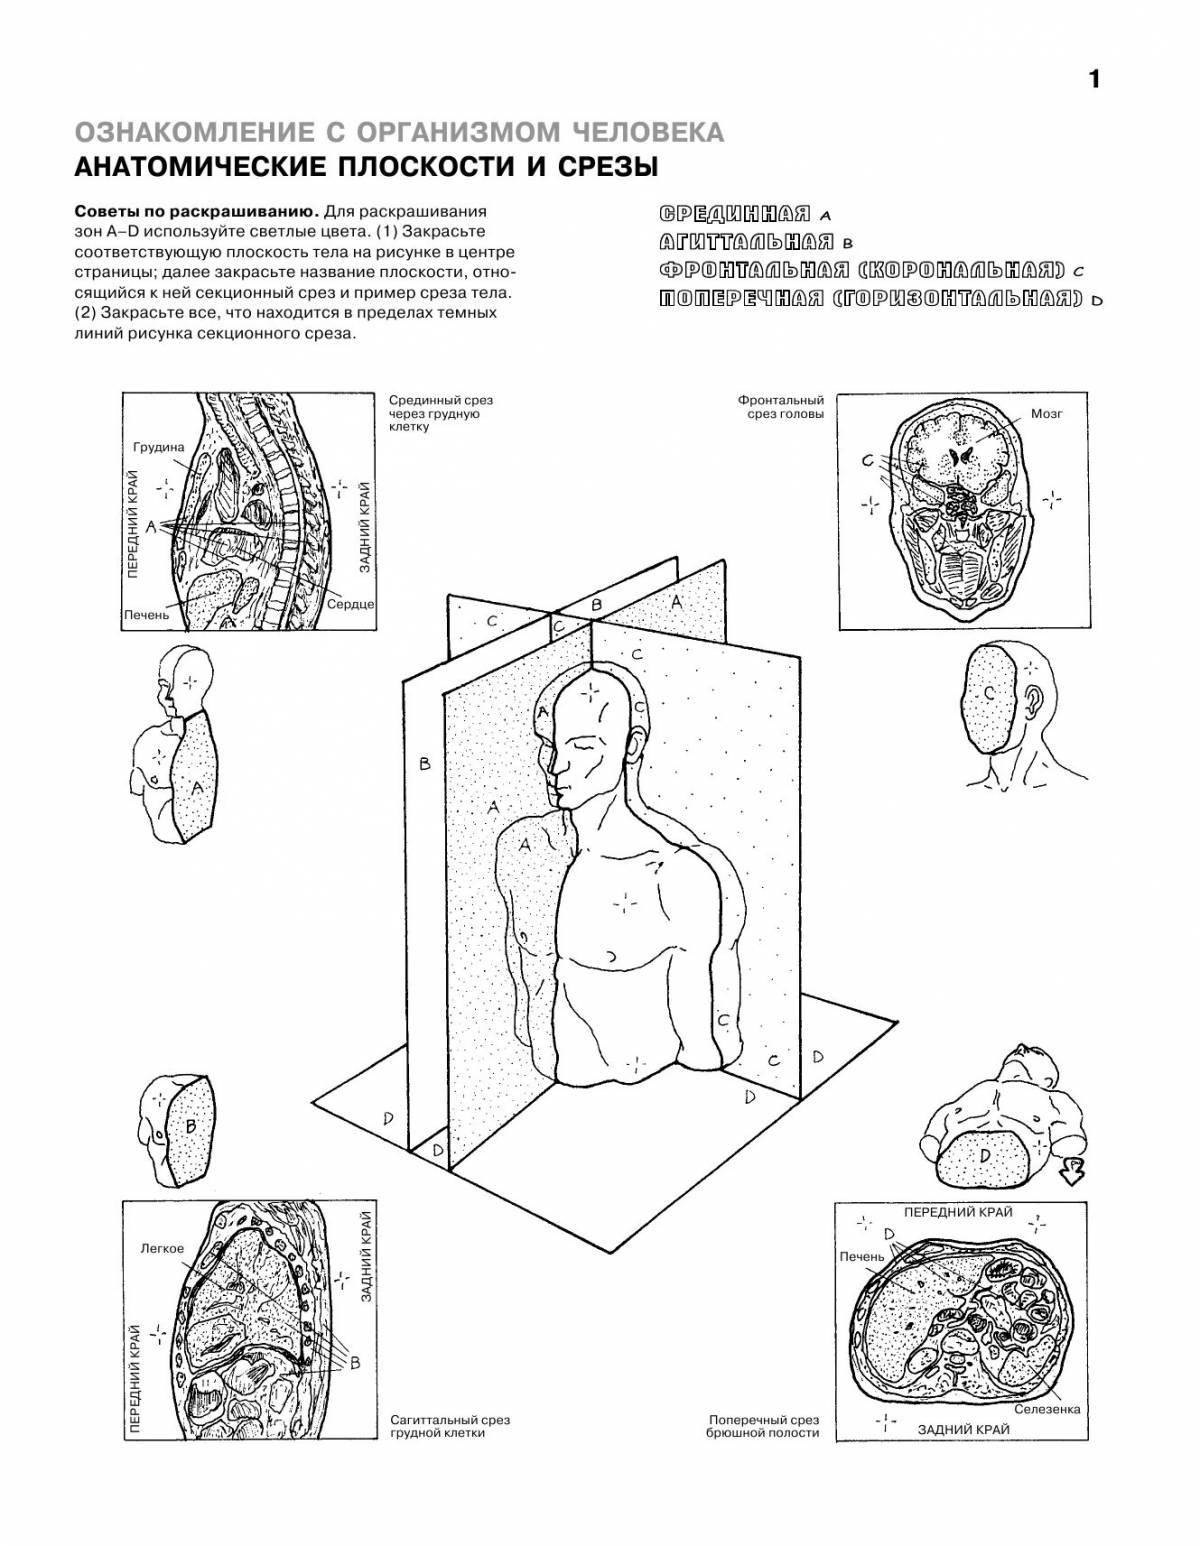 Beautiful netter's anatomy coloring book